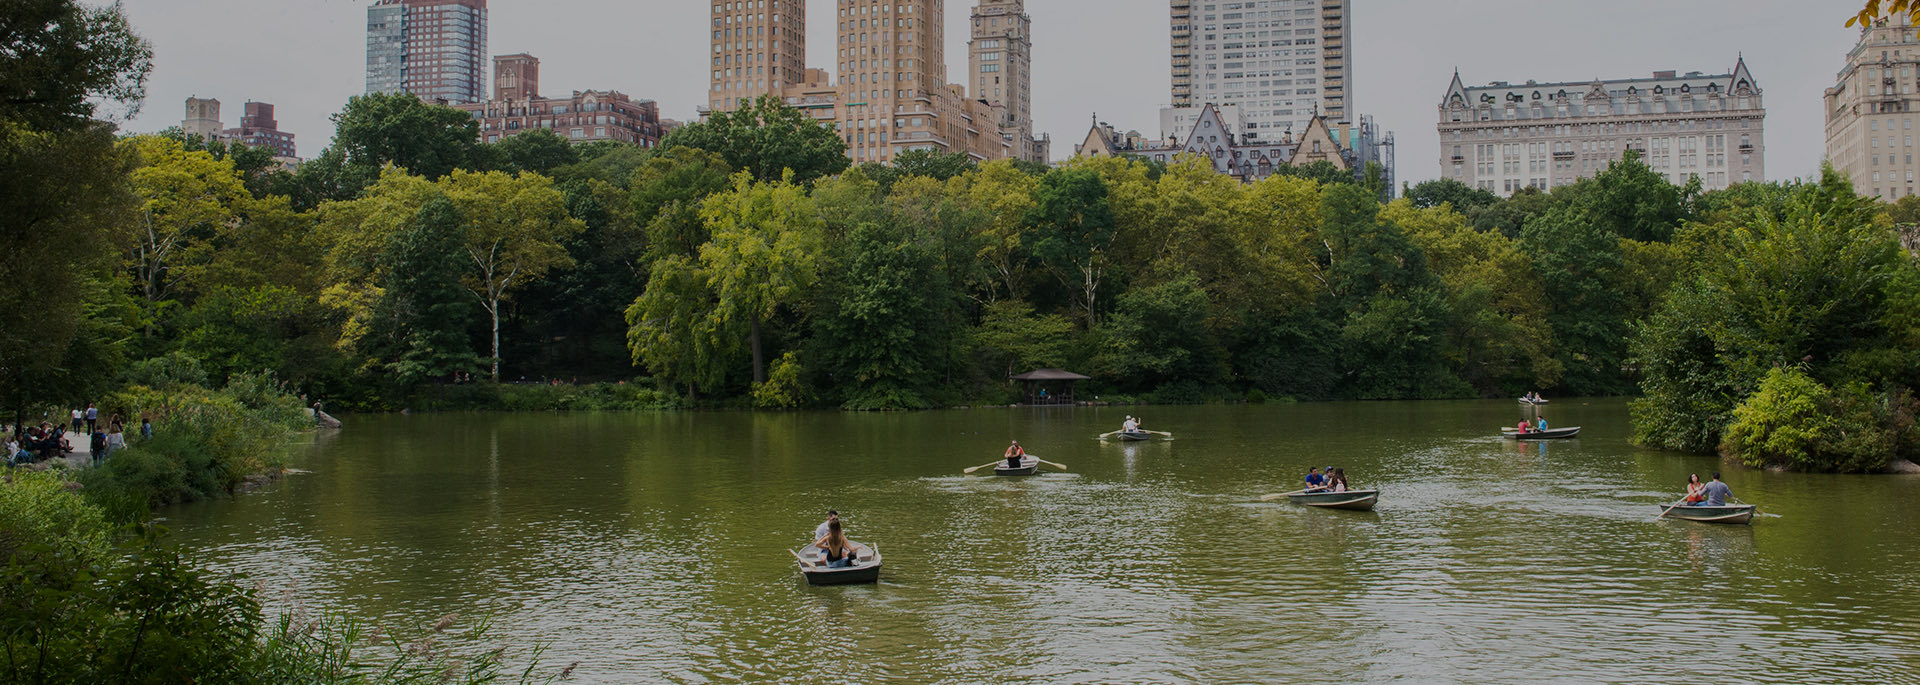 view of people kayaking in a lake at central park